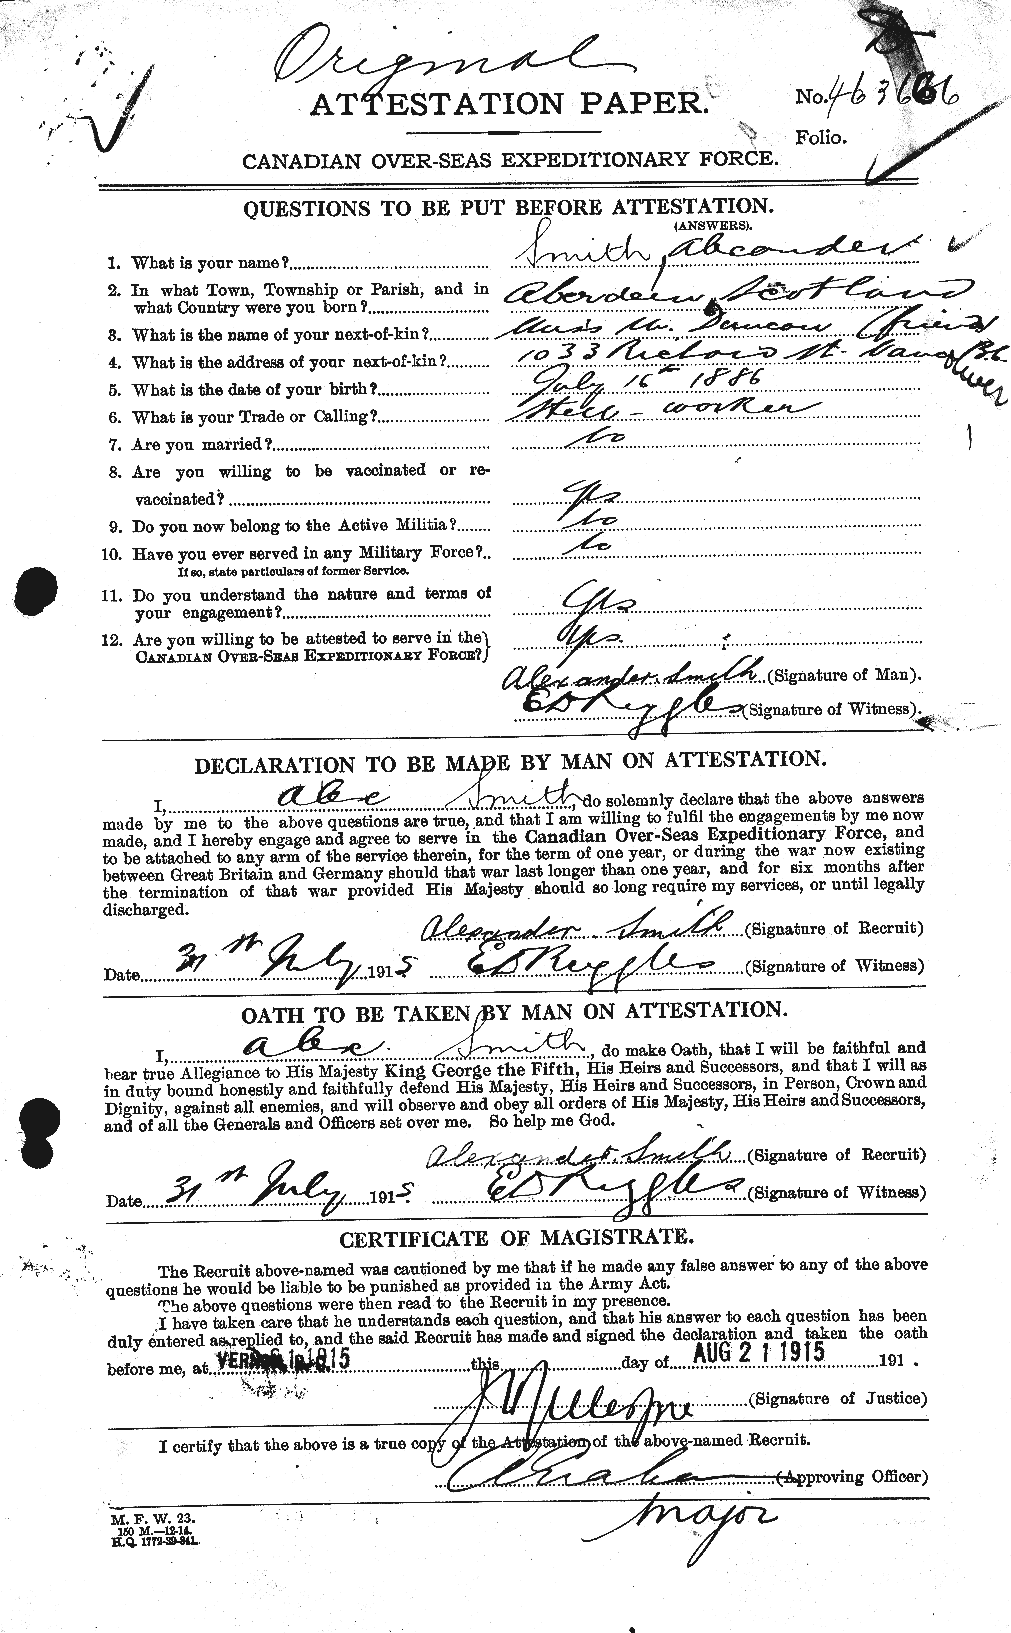 Personnel Records of the First World War - CEF 098453a